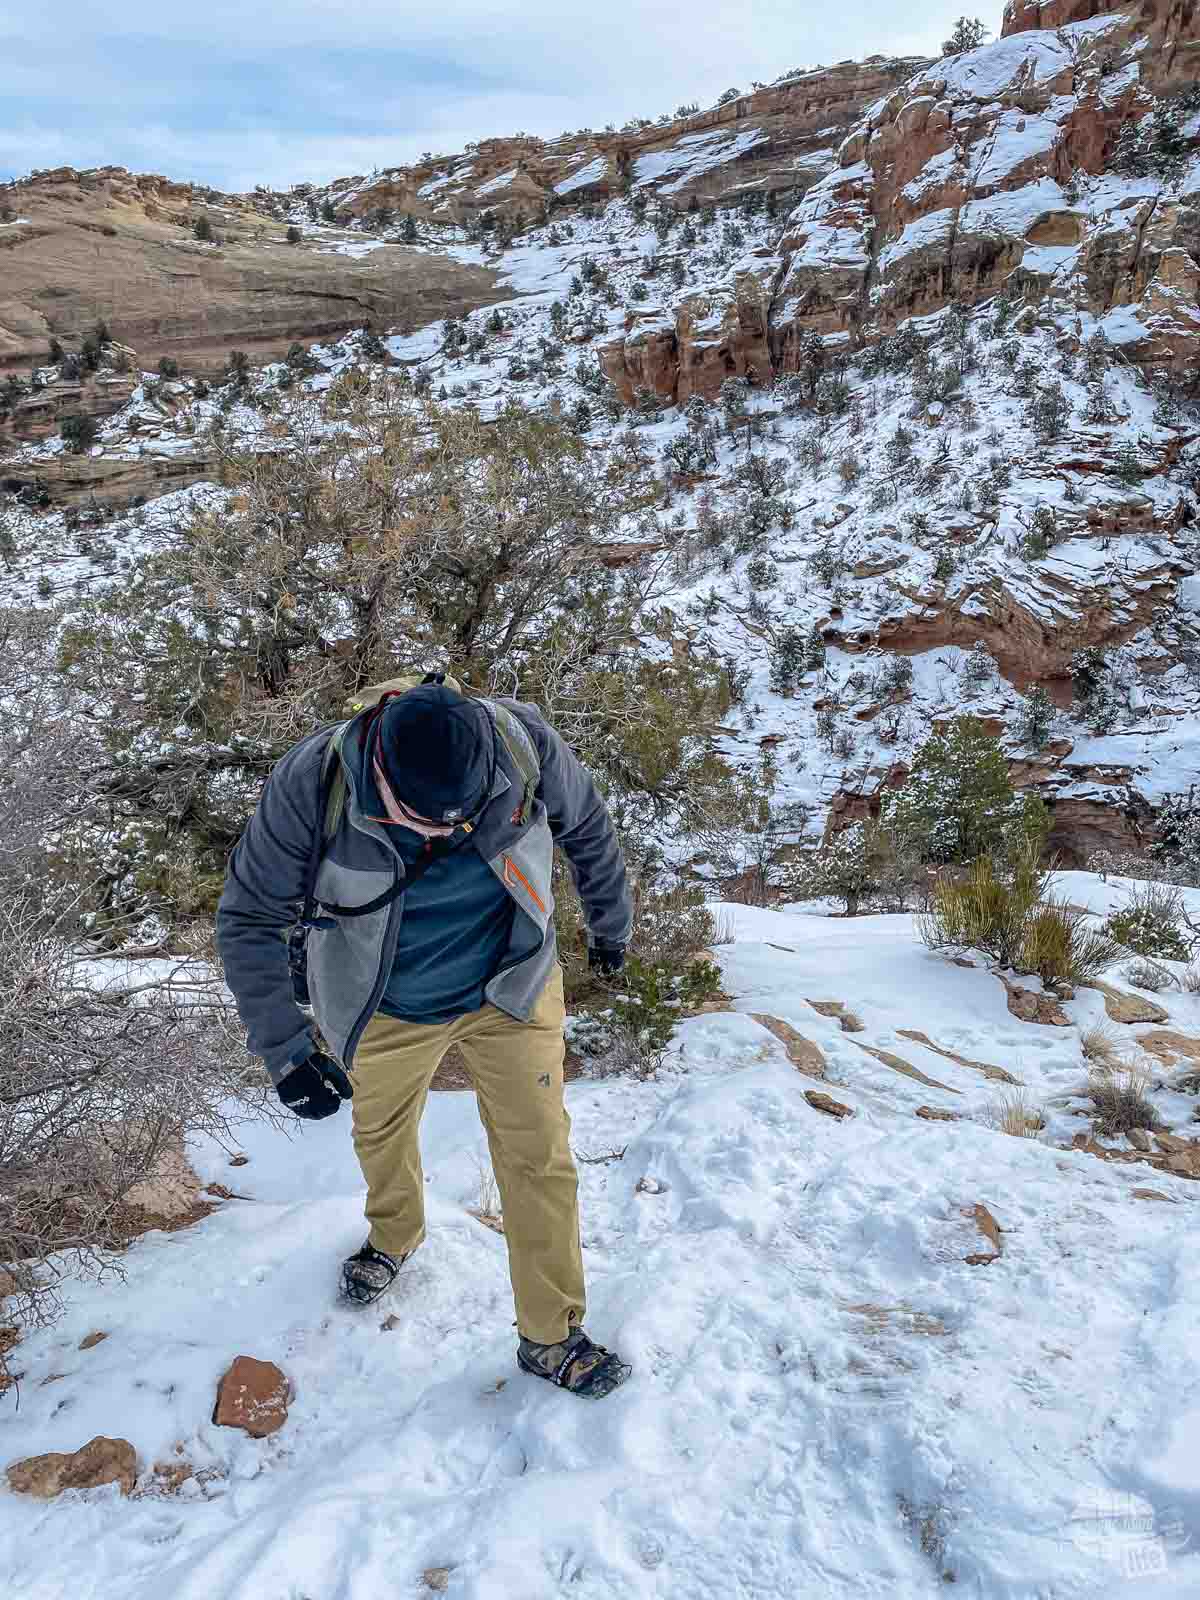 Hiking in Cold Weather - Tips, Tricks and Gear - Our Wander-Filled Life